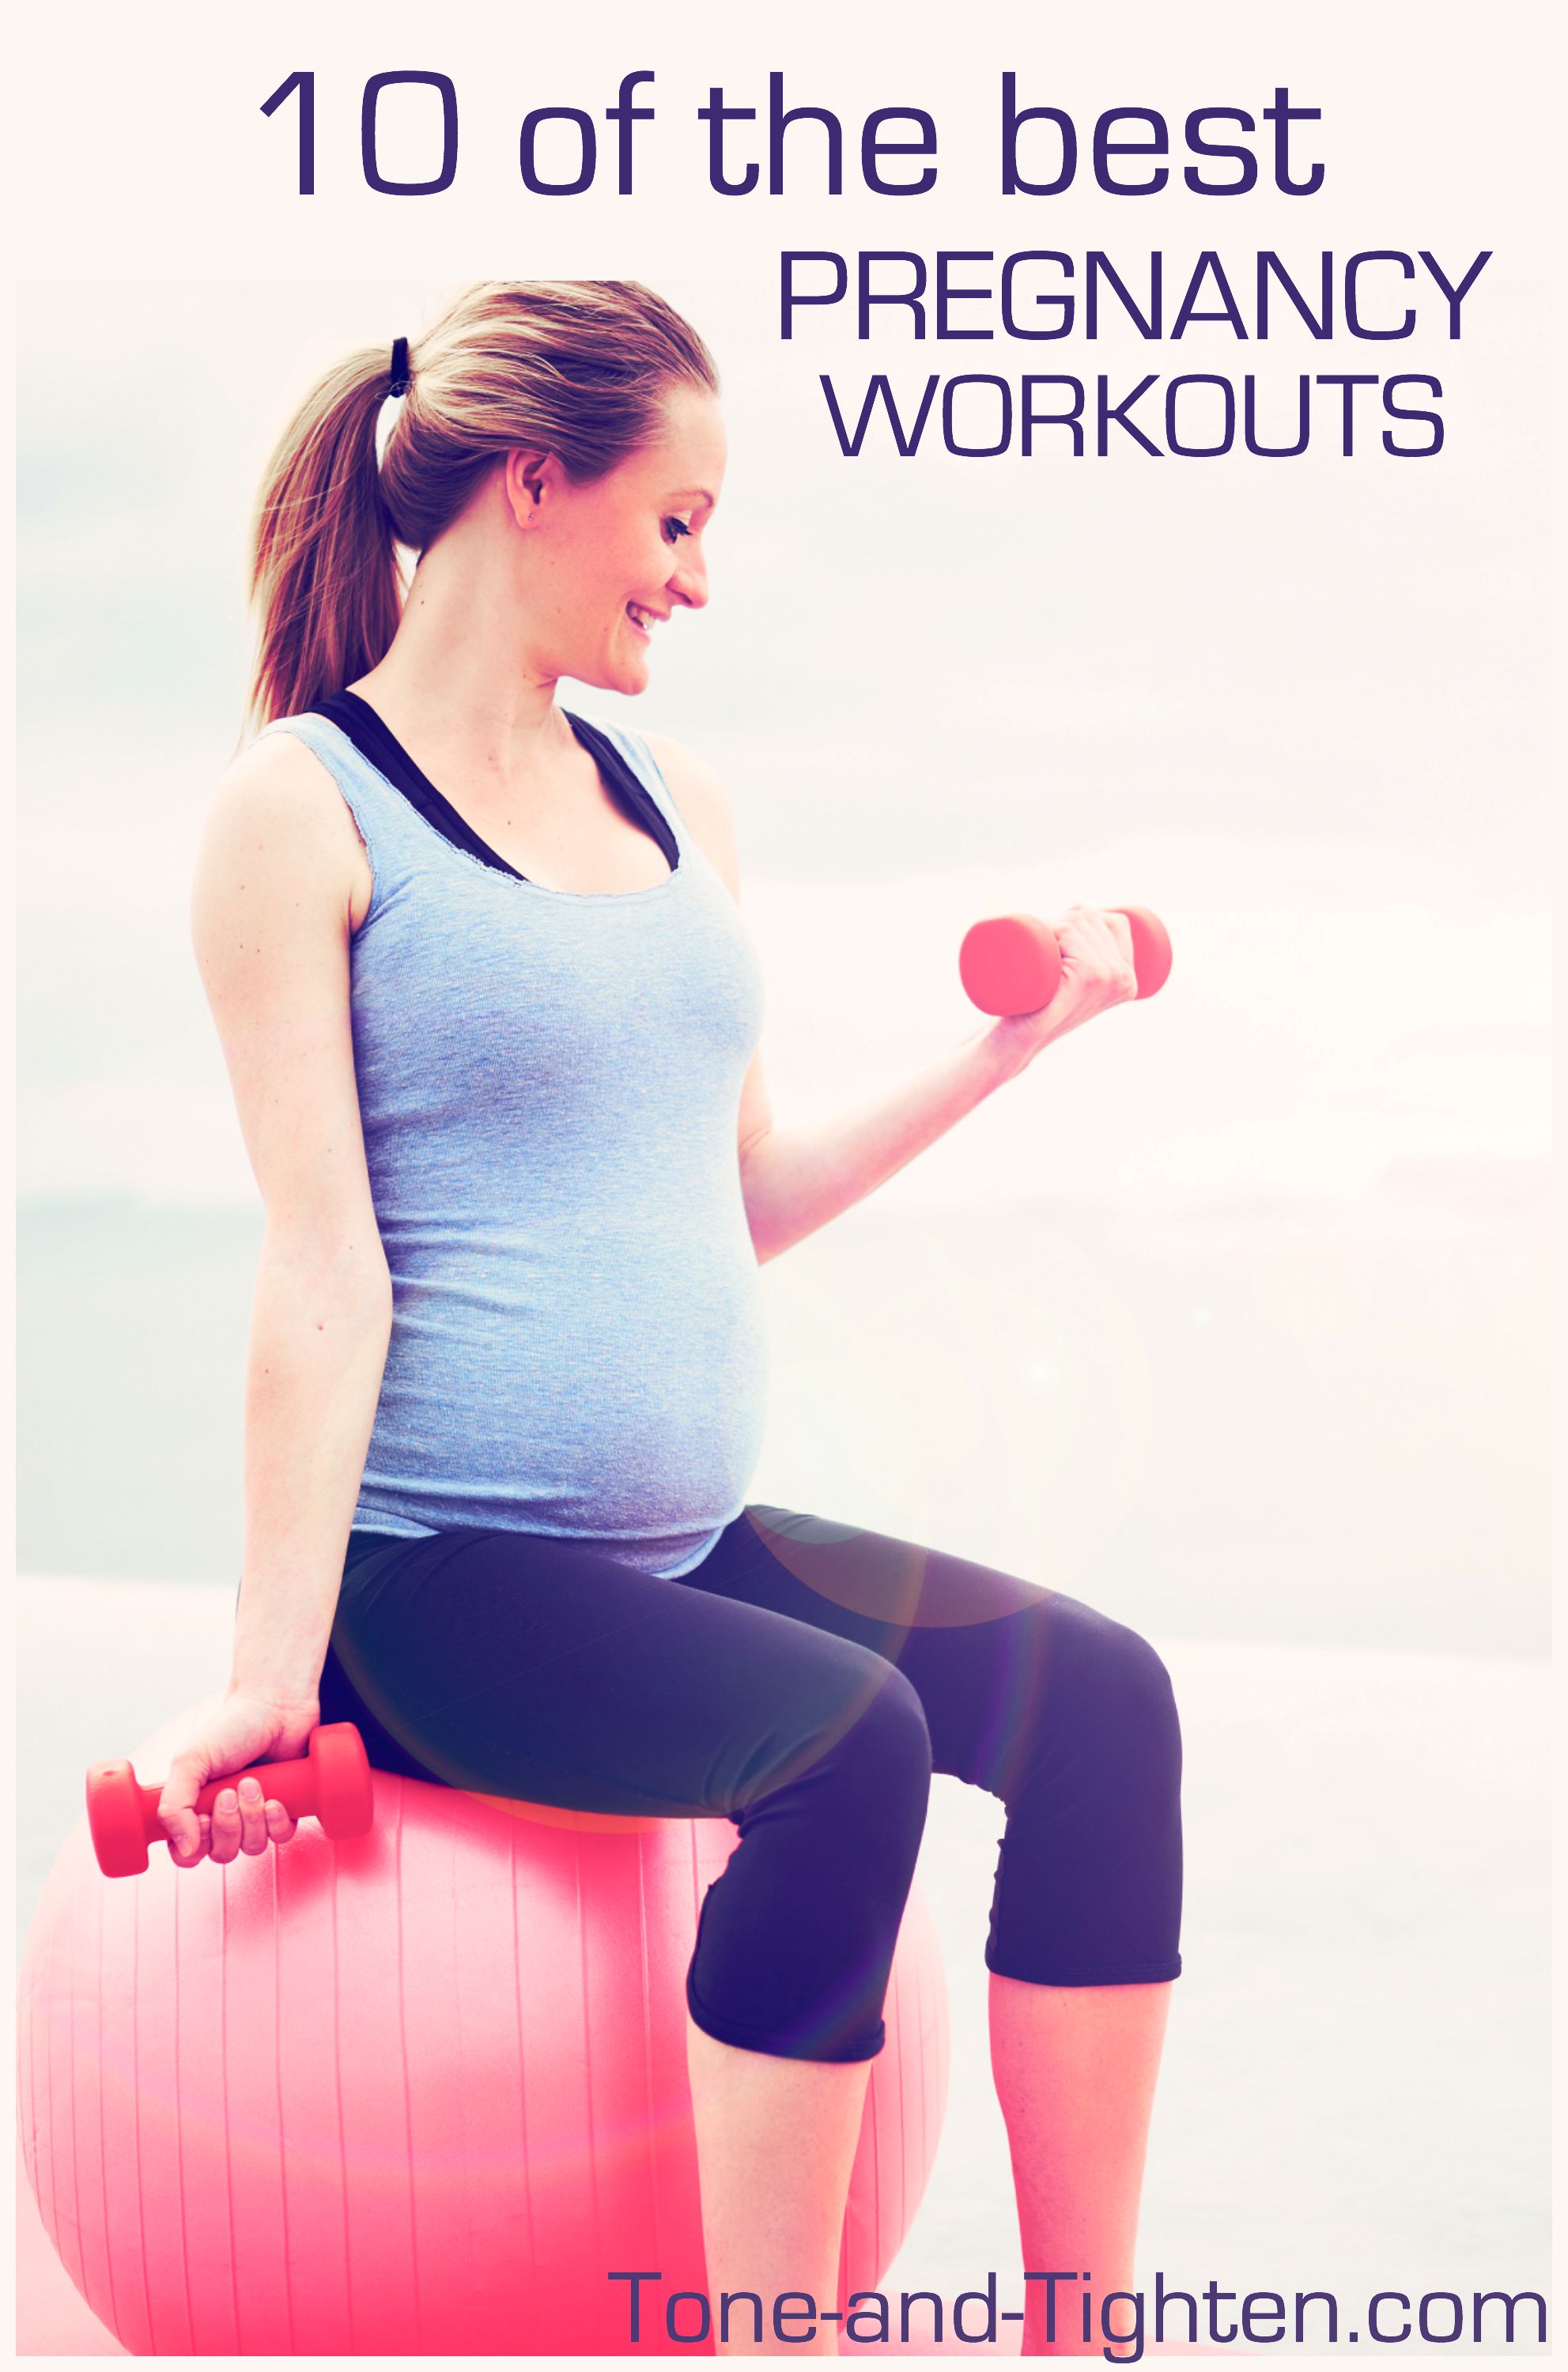 10 of the Best Pregnancy Workouts